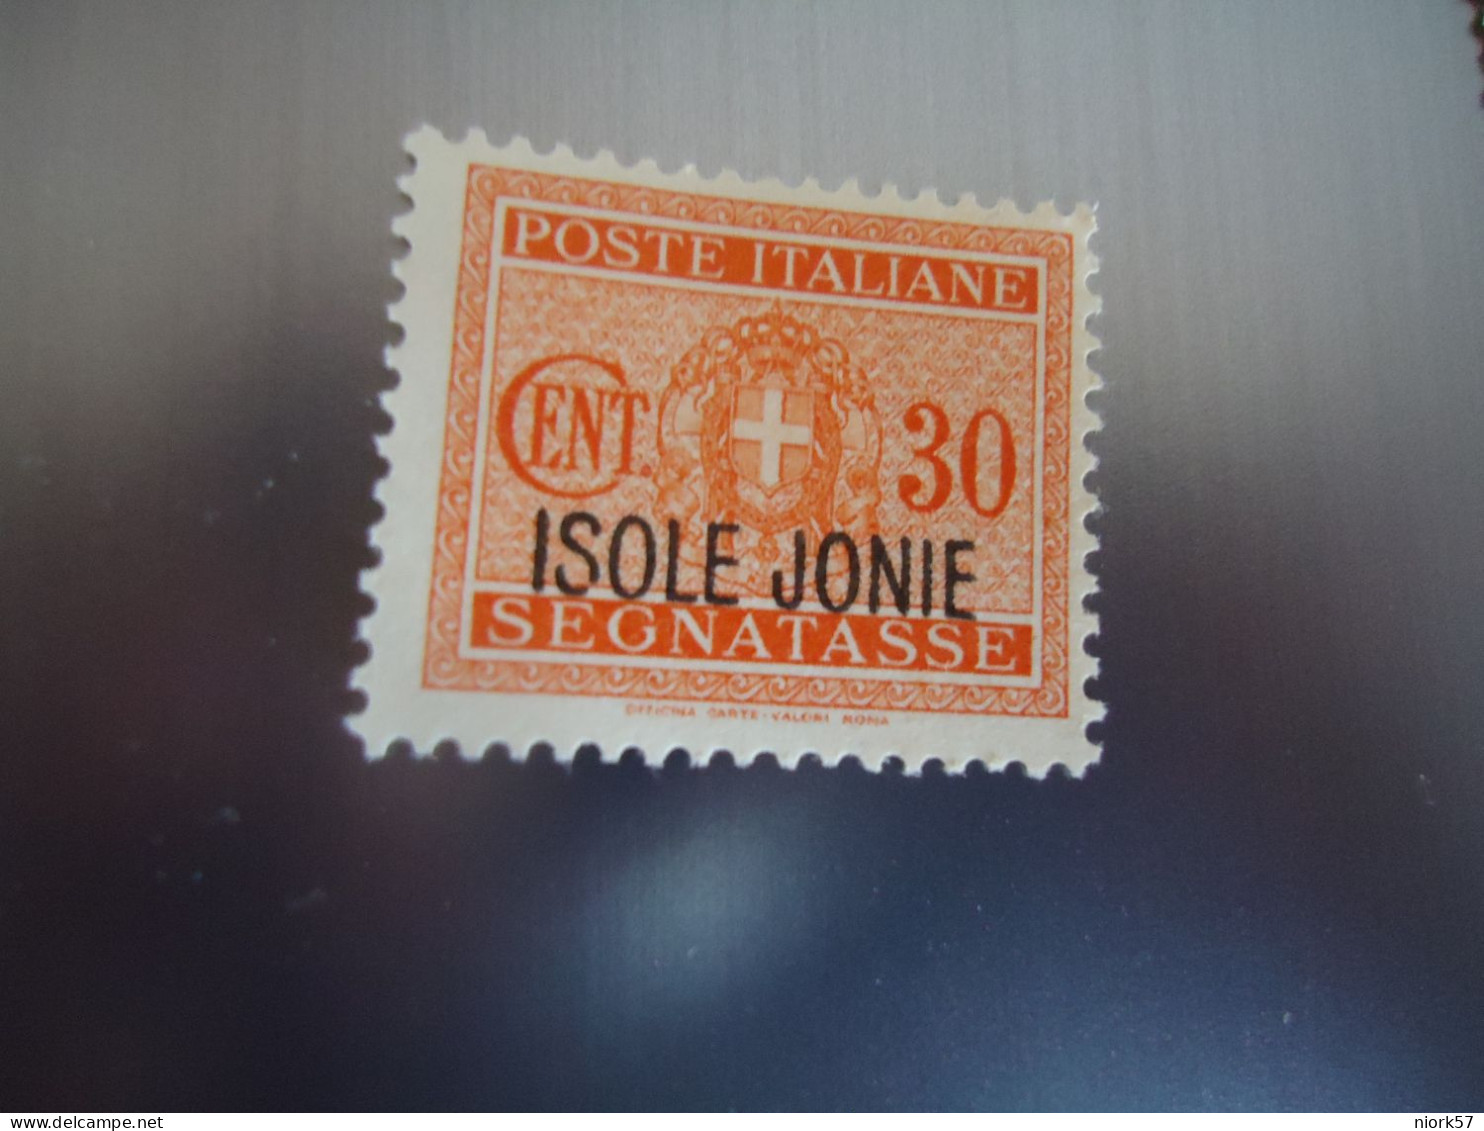 IONIAN ISLANDS GREECE  MNH  ITALY STAMPS OVEPRPIN ISOLE JONIE - Iles Ioniques